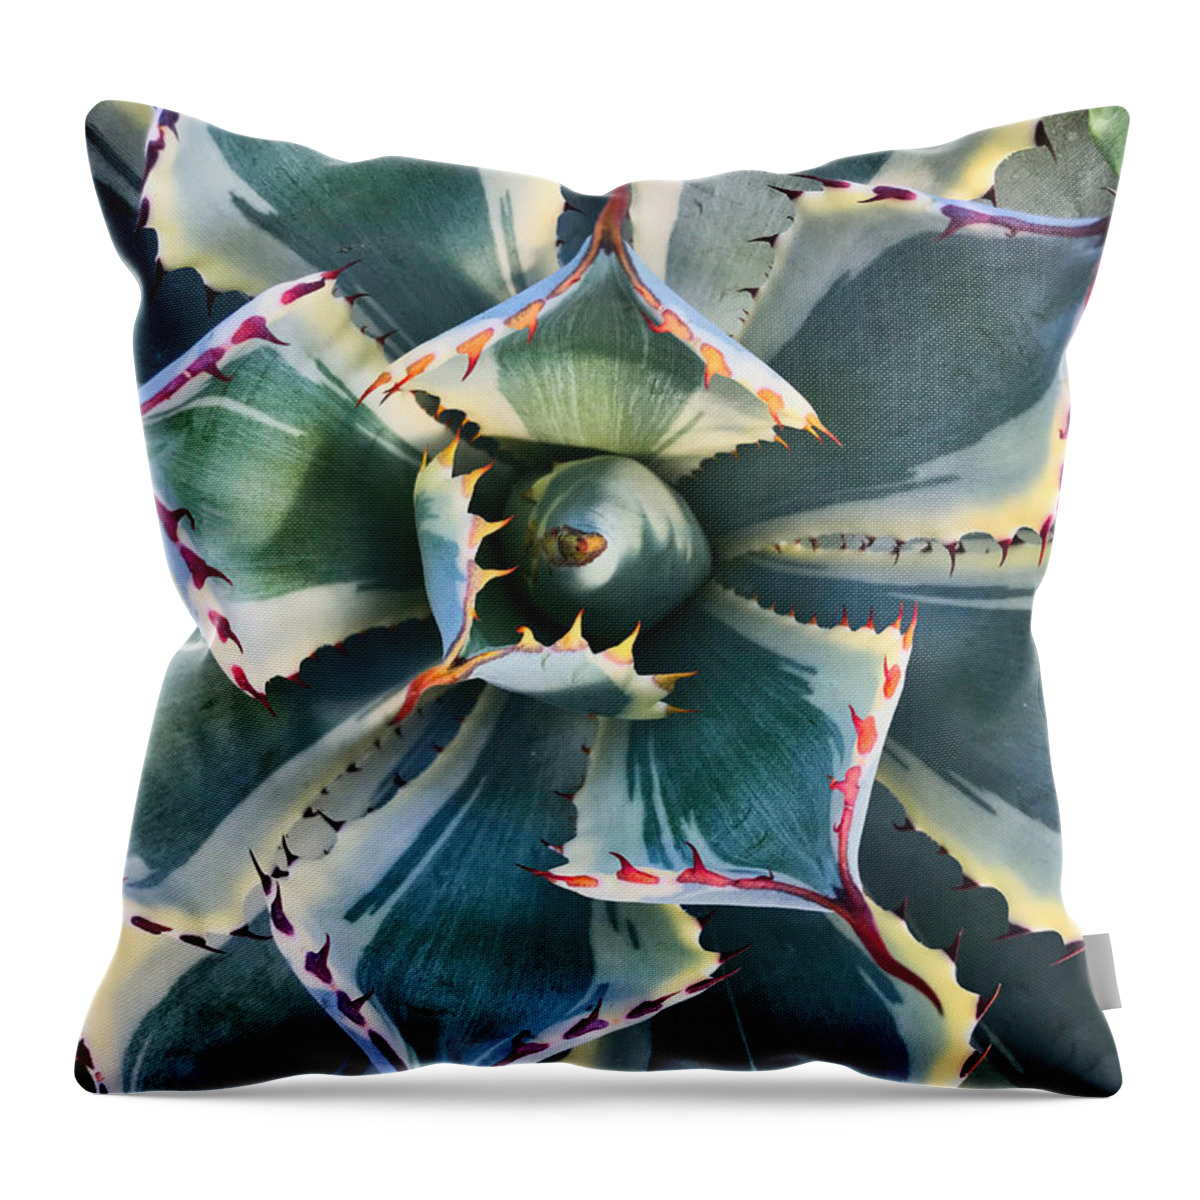 Plant Throw Pillow featuring the photograph Pinwheel Succulent by Tom Gresham